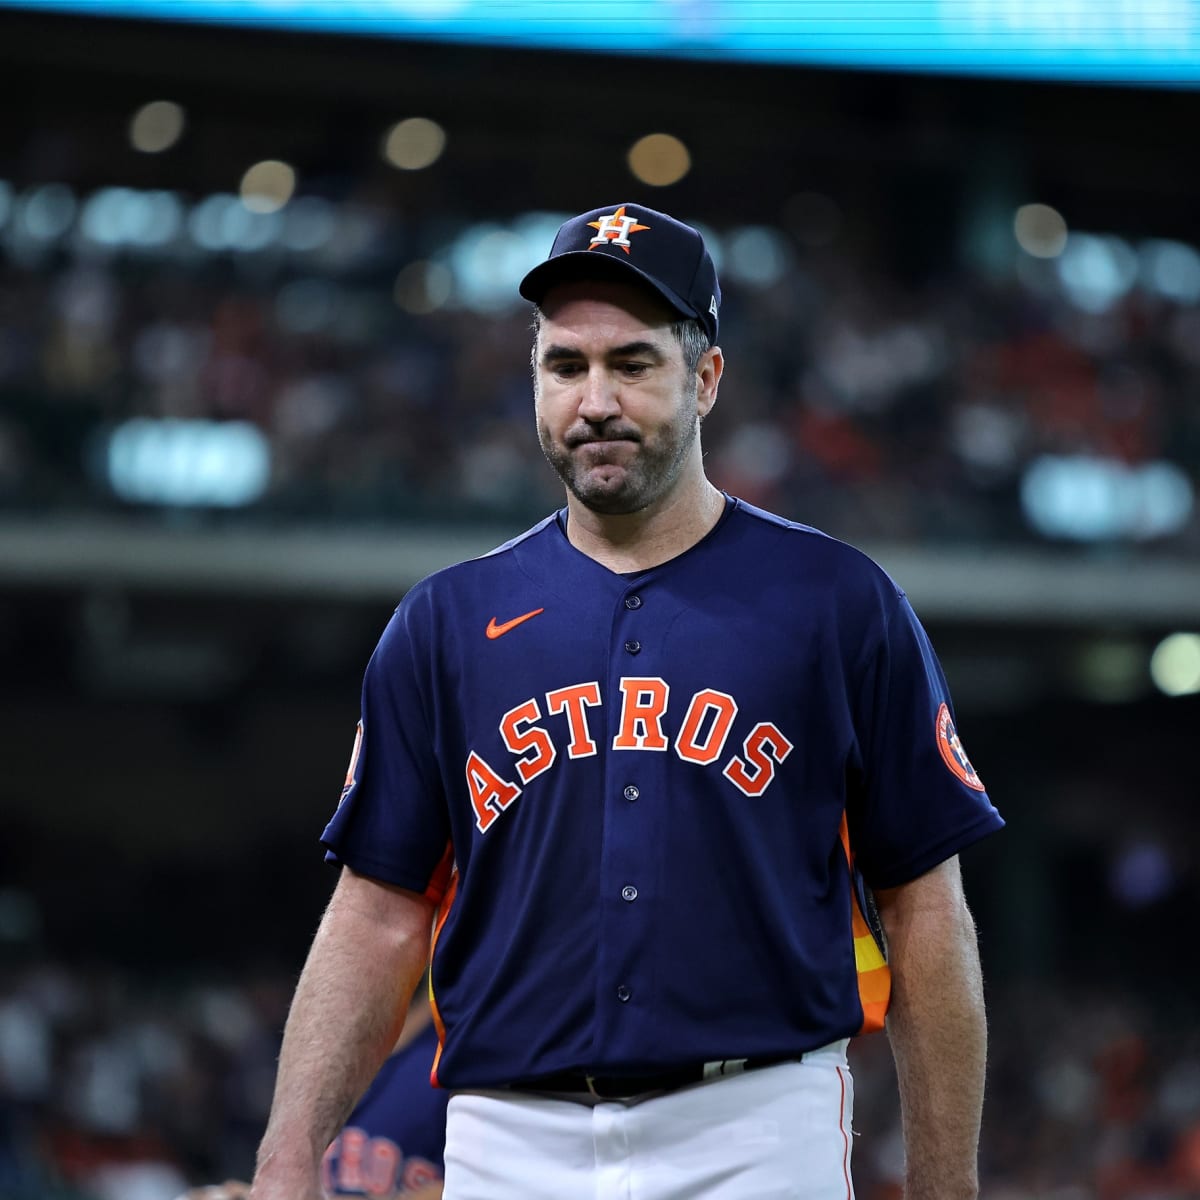 Vintage Verlander dominates as Astros shut out Mariners 4-0 - The Columbian